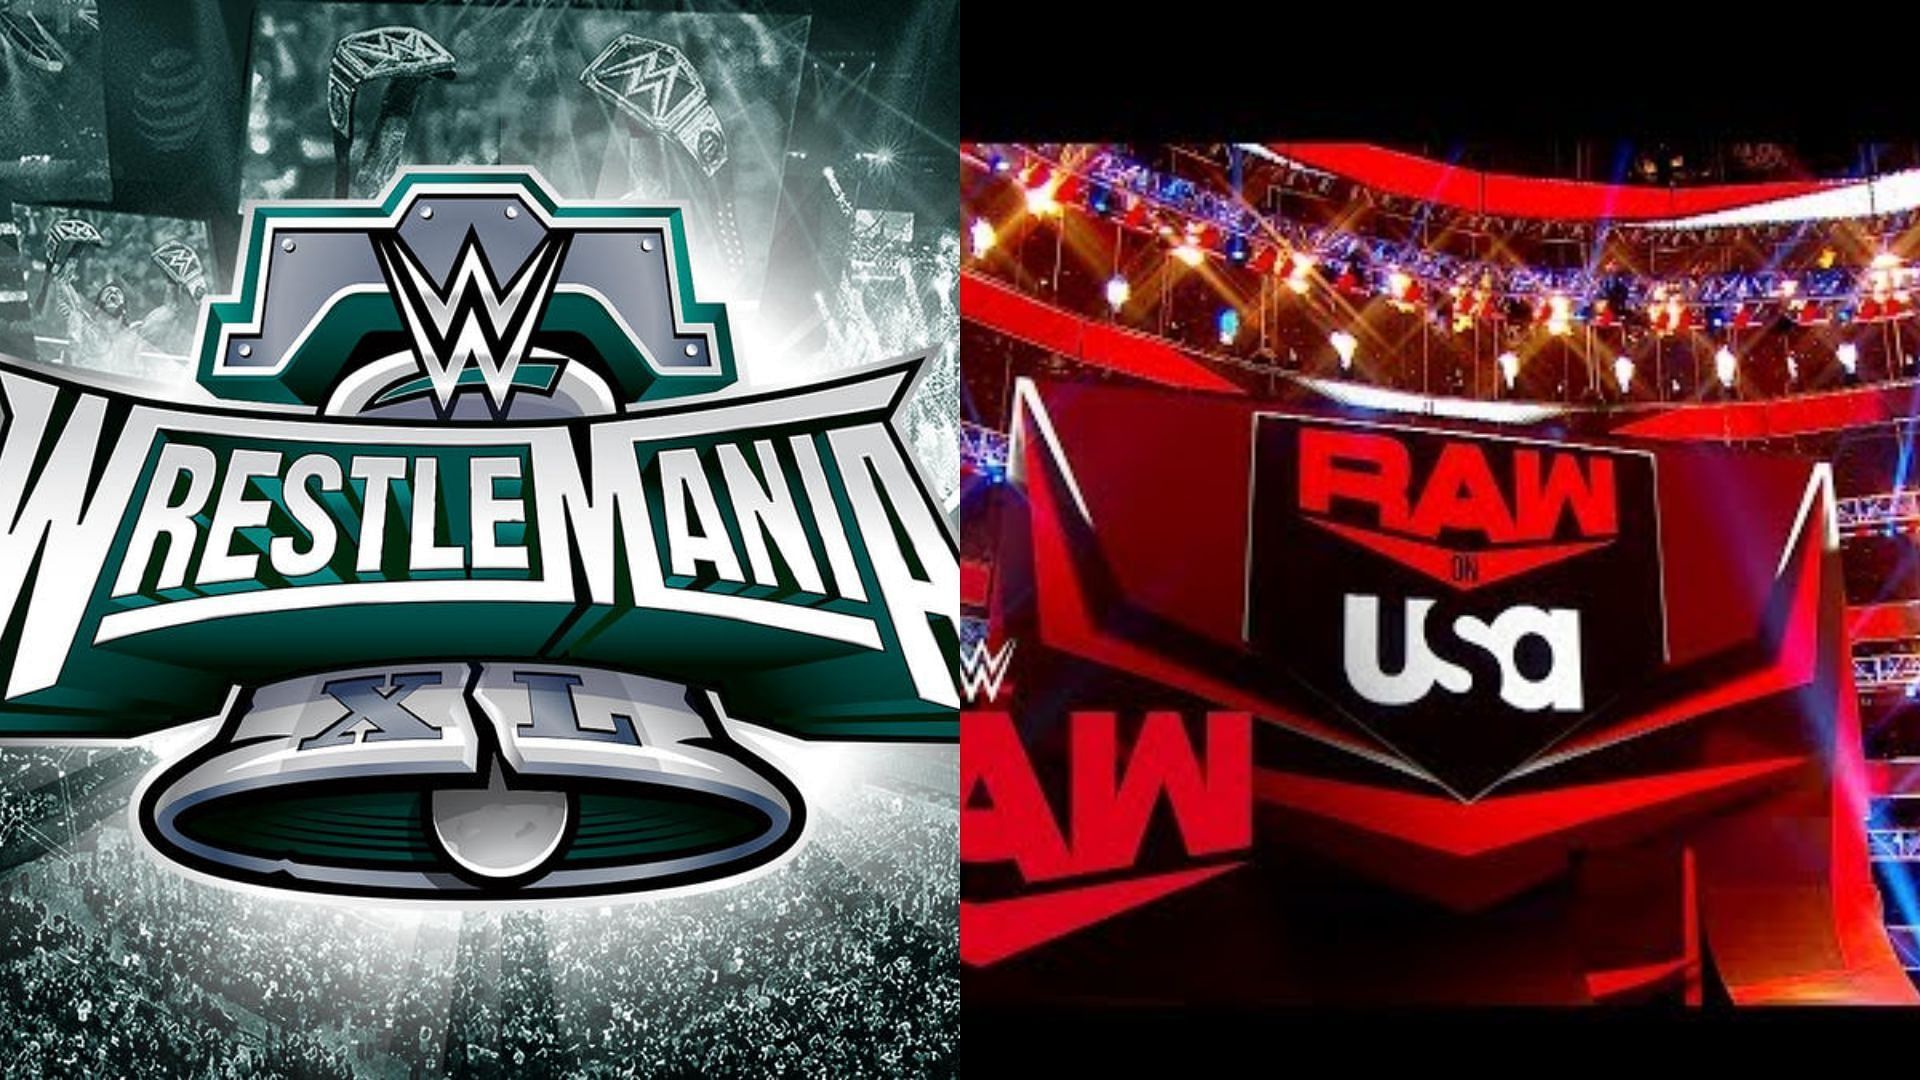 WWE continued the build up to WrestleMania on RAW